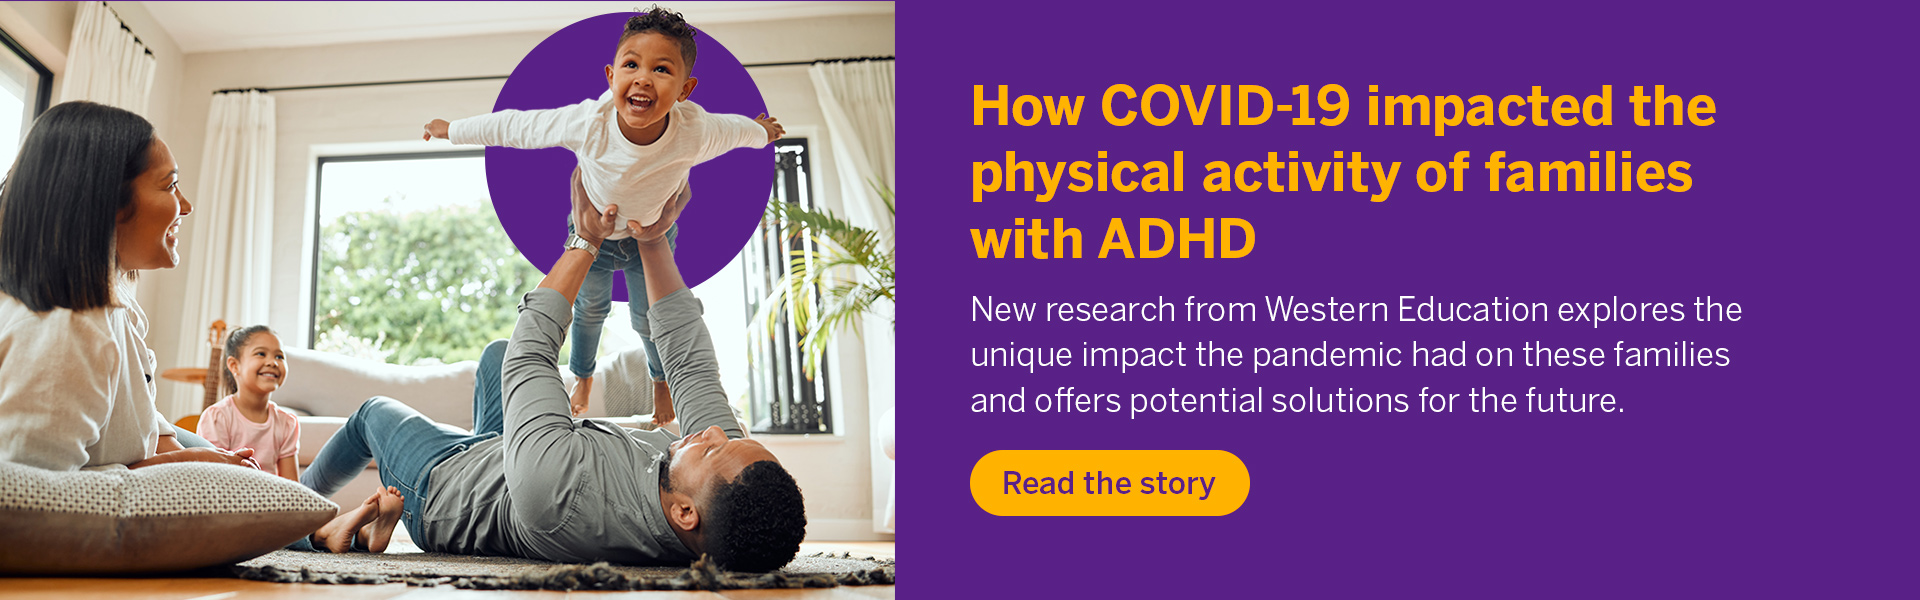 Reduced physical activity, worsening mental health and a negative feedback loop that formed as a result make up some of the unique impacts felt by families raising children with attention deficit hyperactivity disorder (ADHD) during the COVID-19 pandemic.